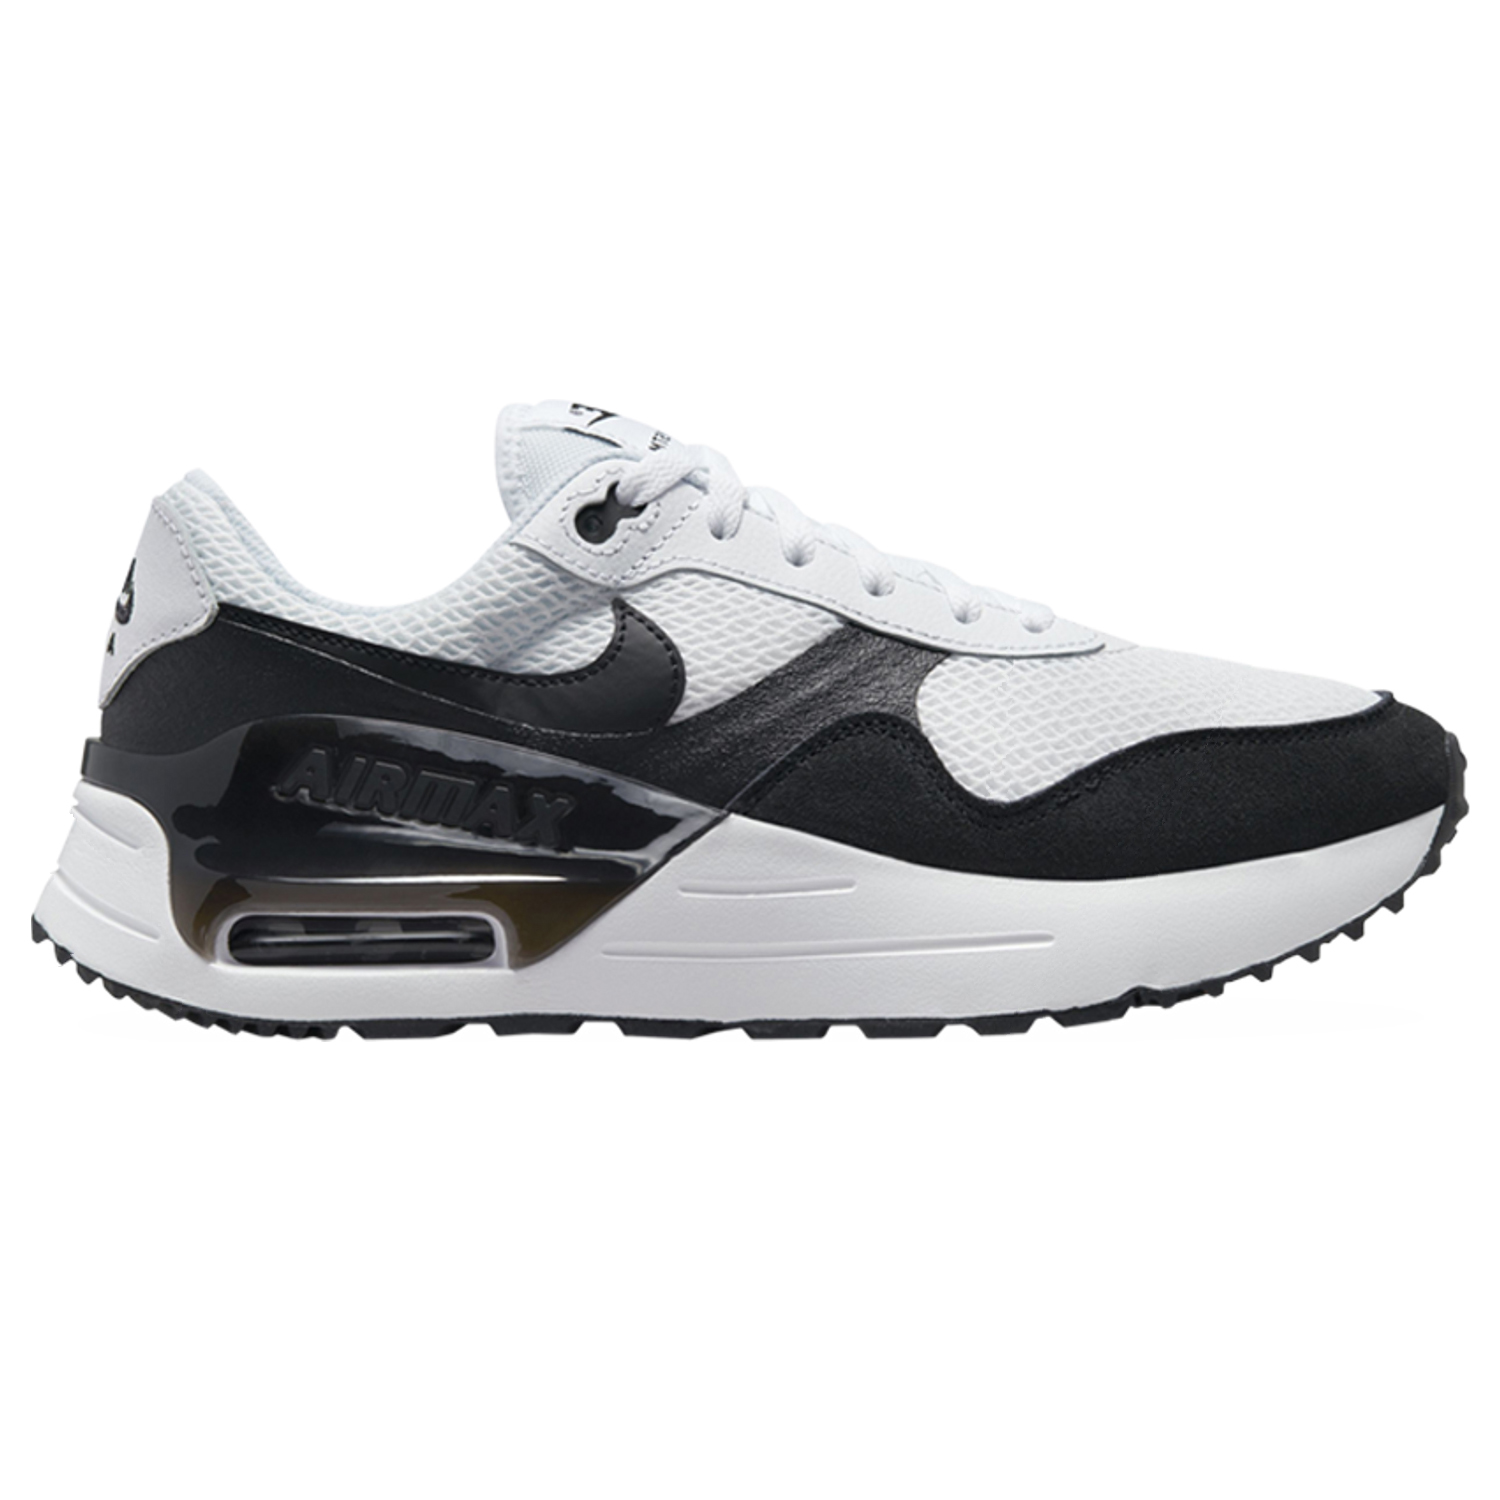 Кроссовки Nike Air Max SYSTM 'White Black', Белый кроссовки nike air max bolt td white black белый